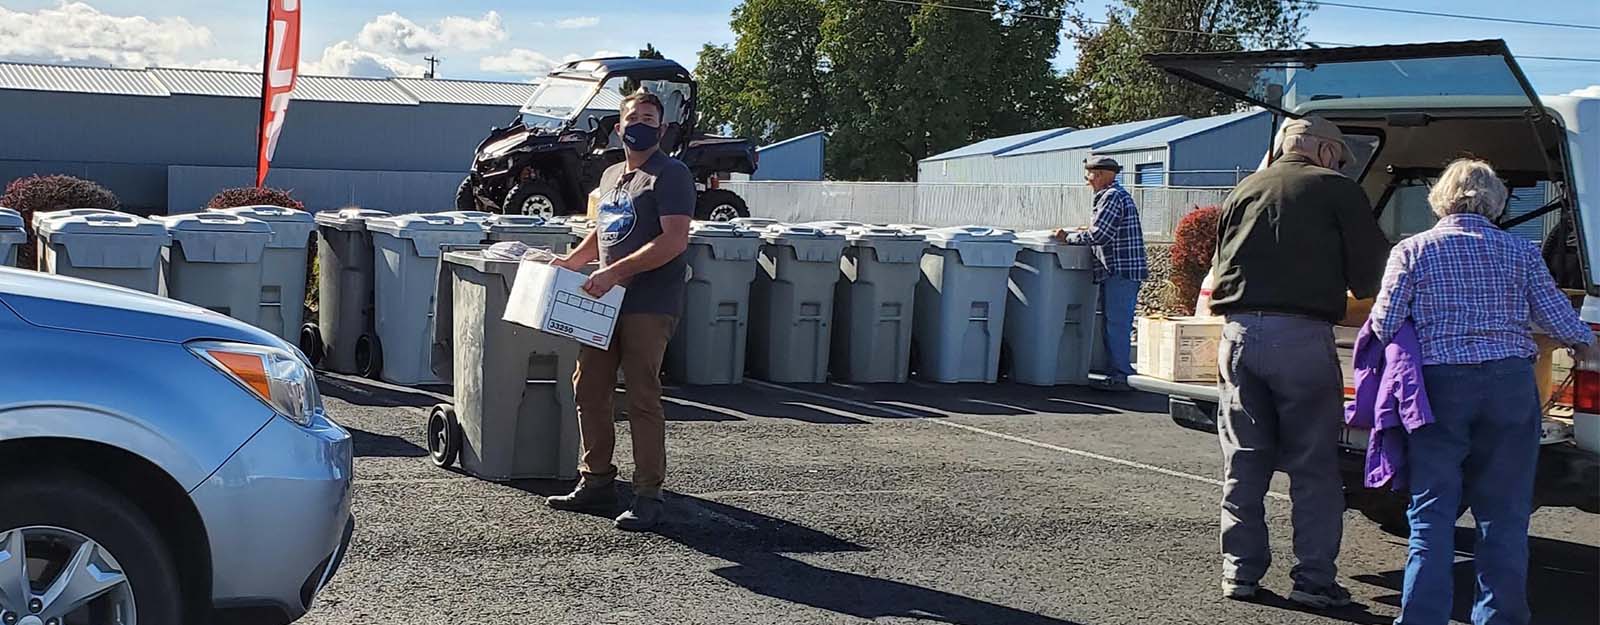 People working Shred Day event